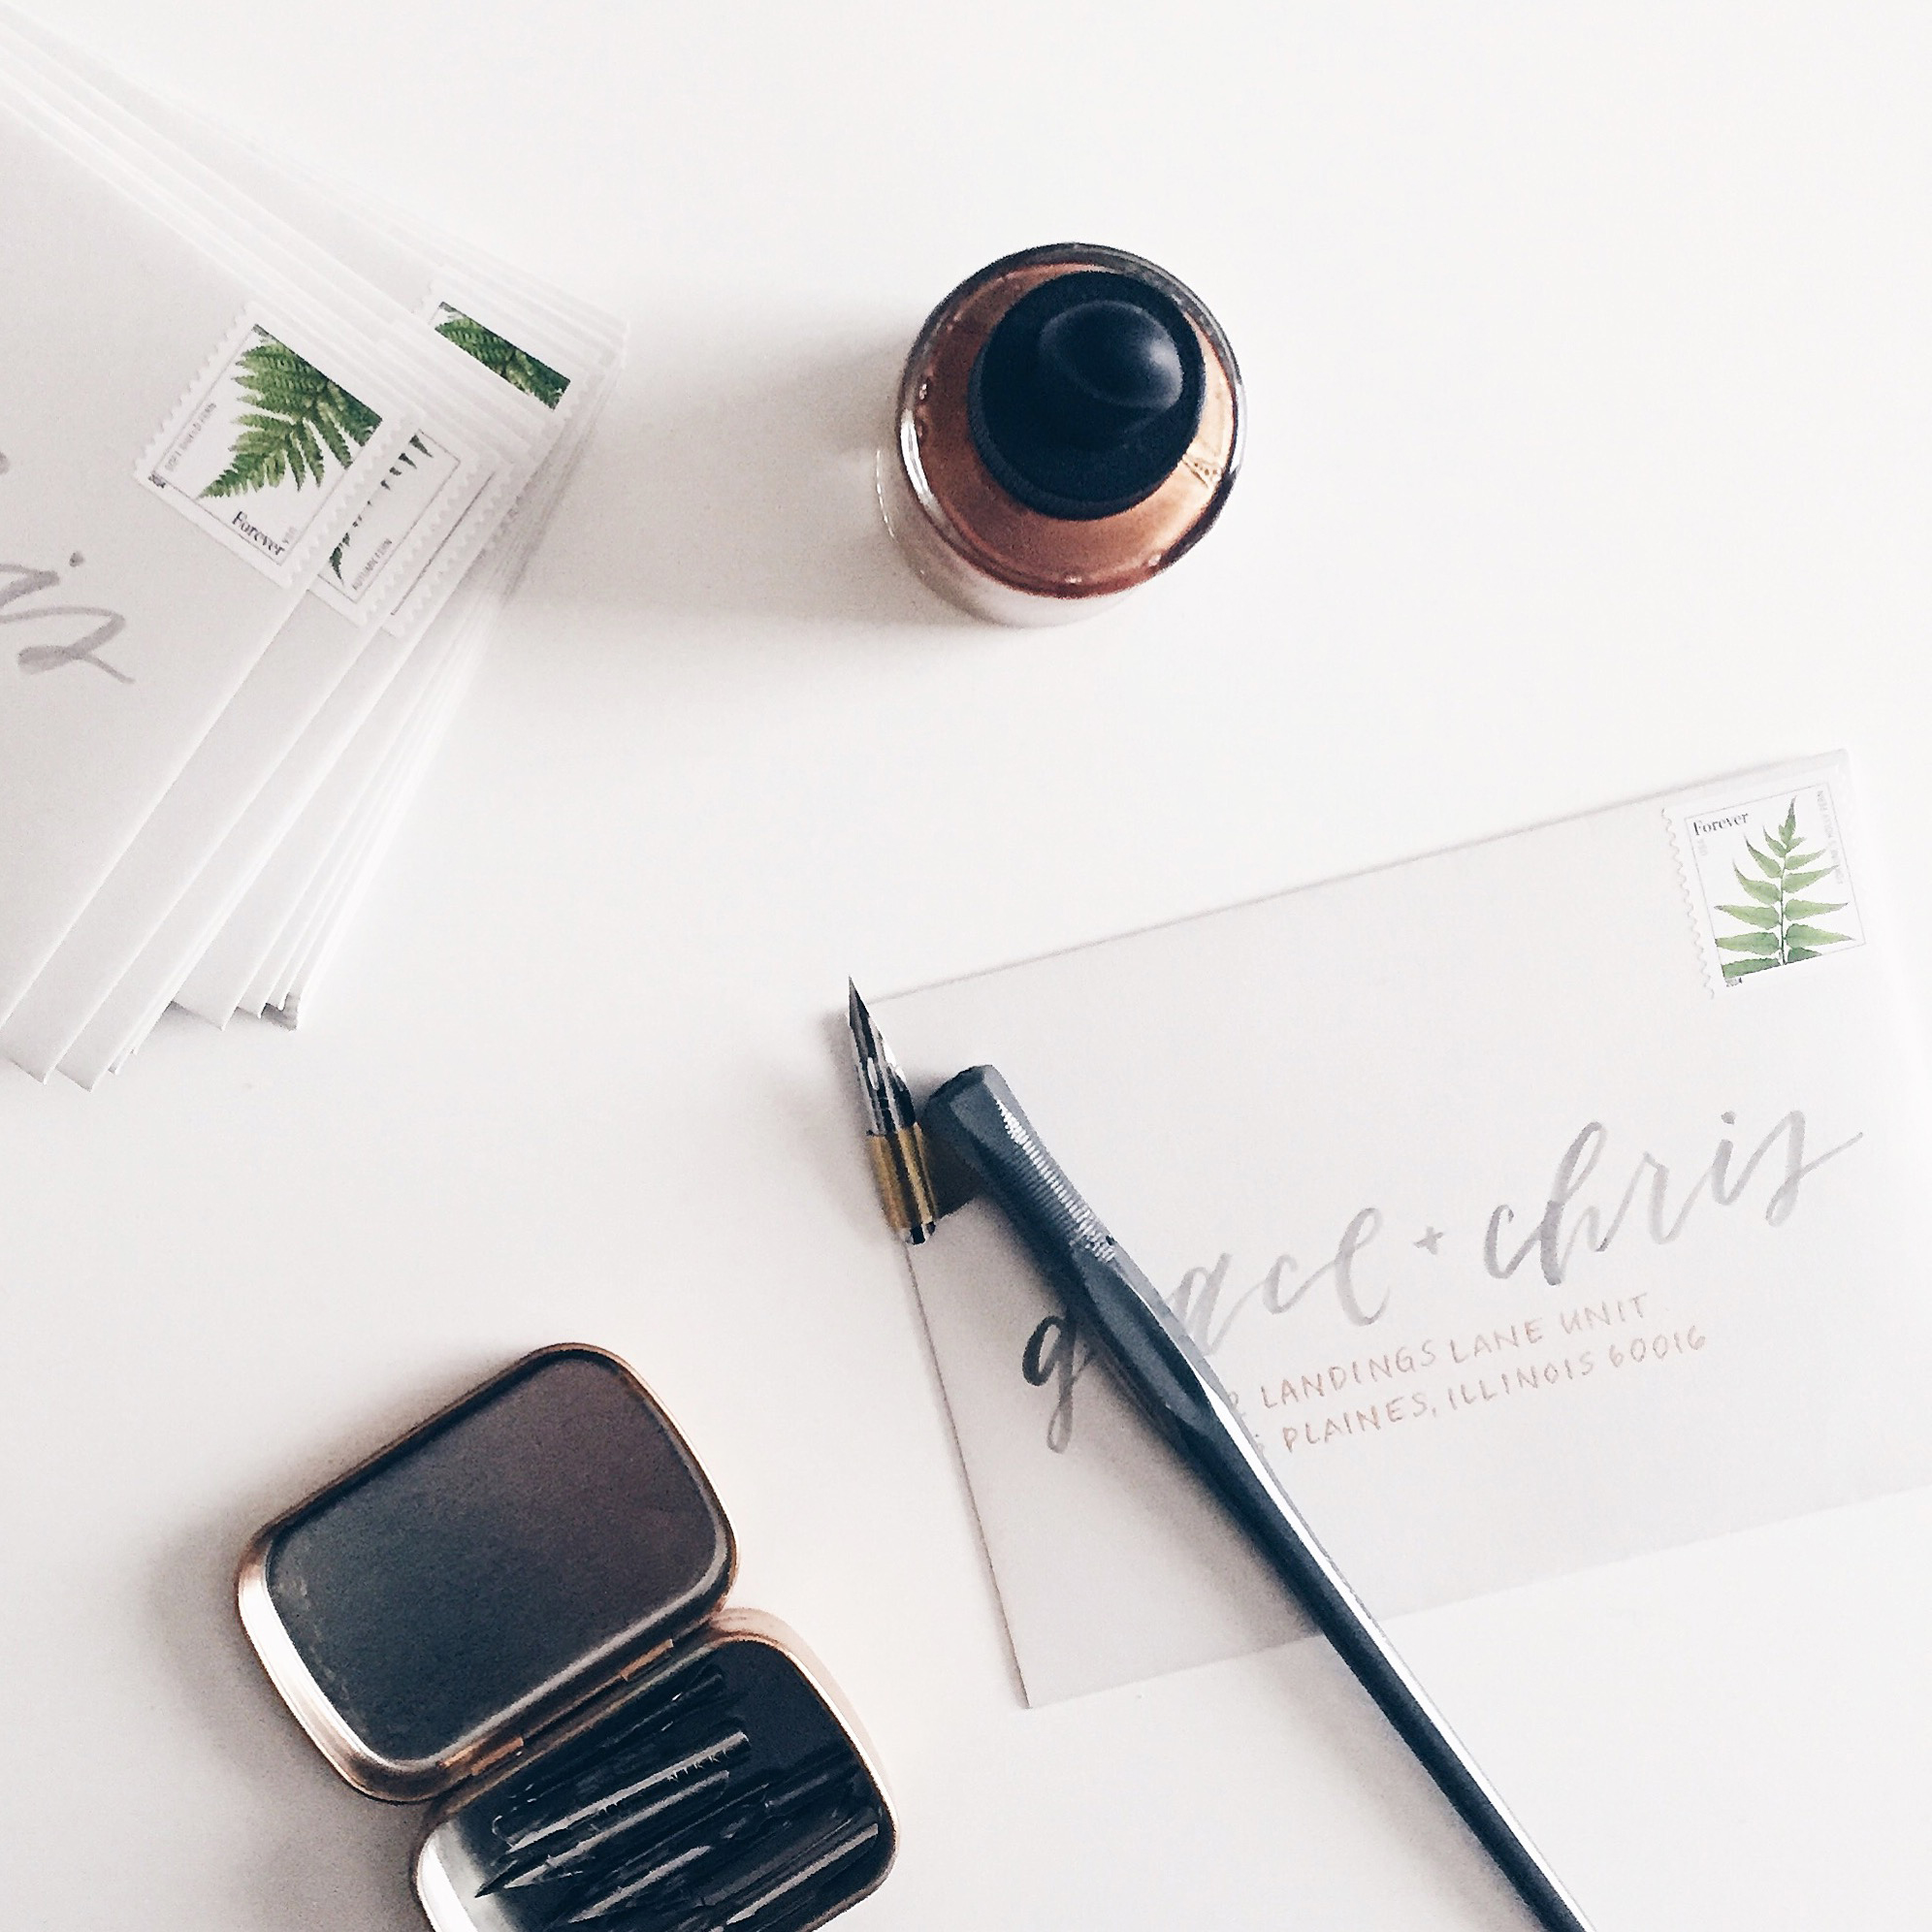 HOW TO: Use Bleedproof White Ink for Pointed Pen Calligraphy